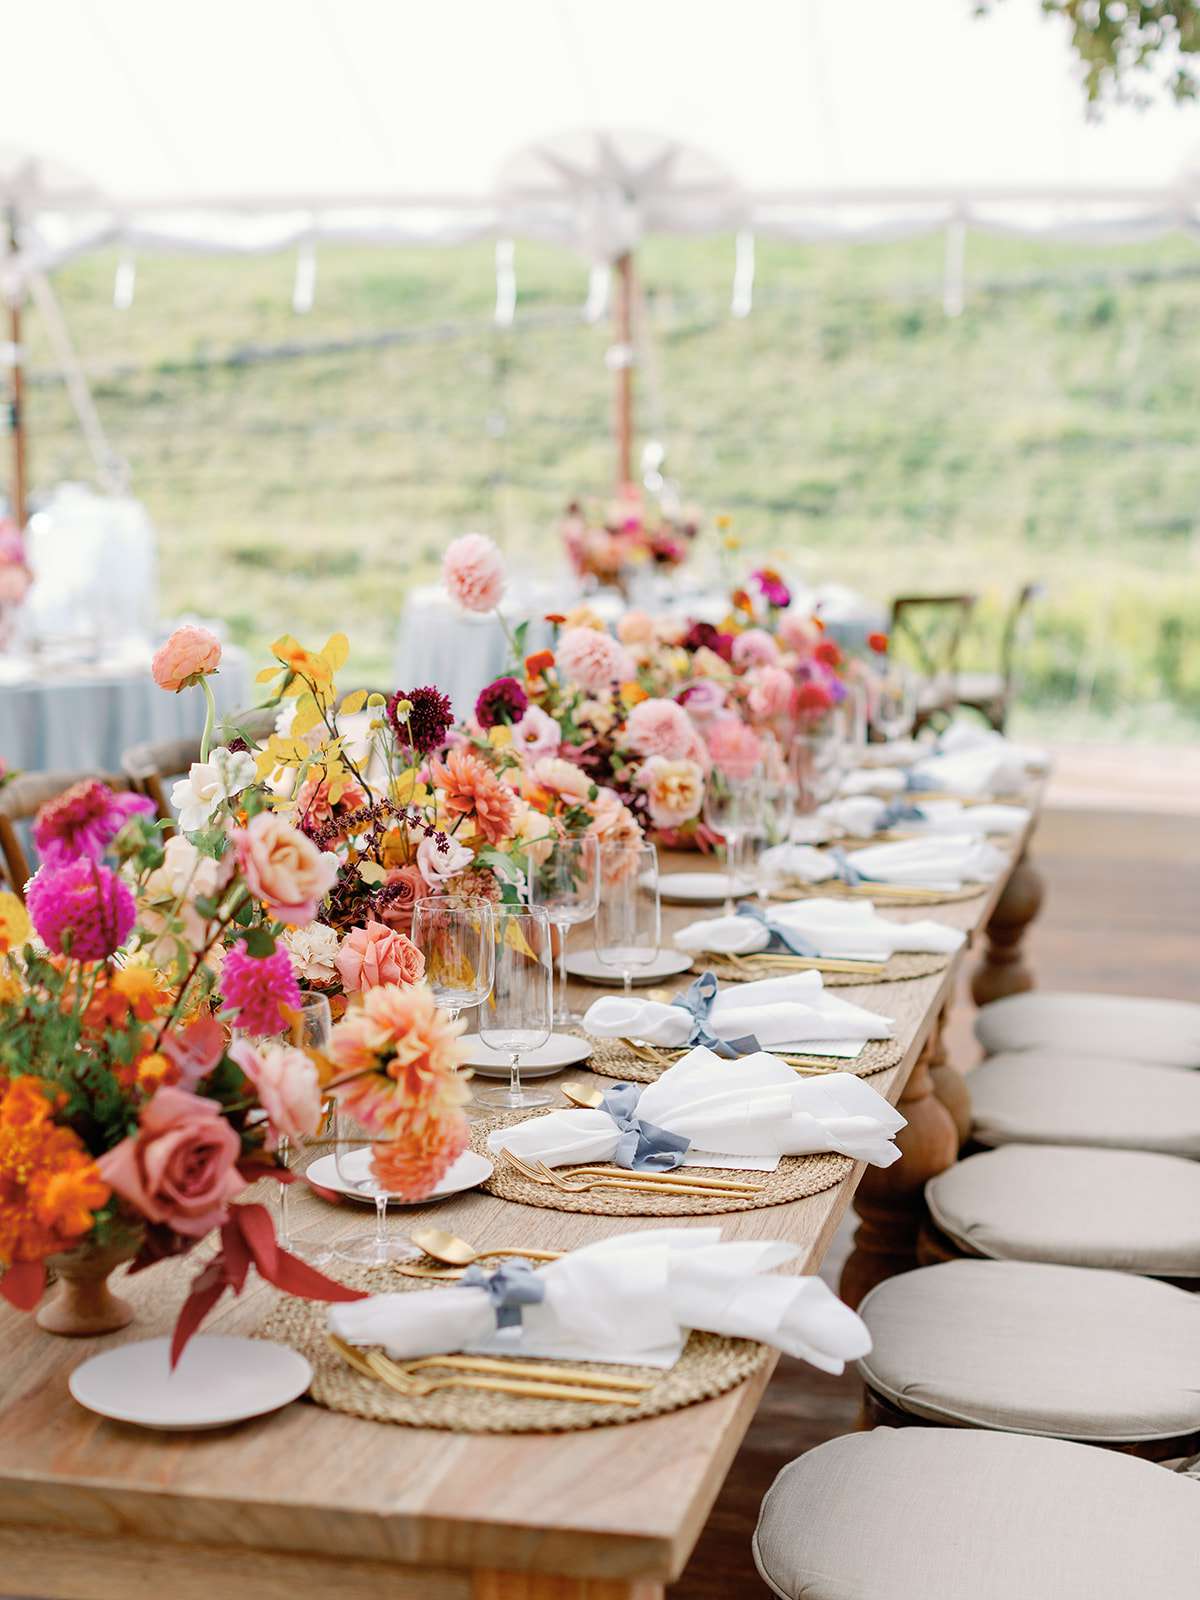 outdoor reception table with colorful floral display with gold accents